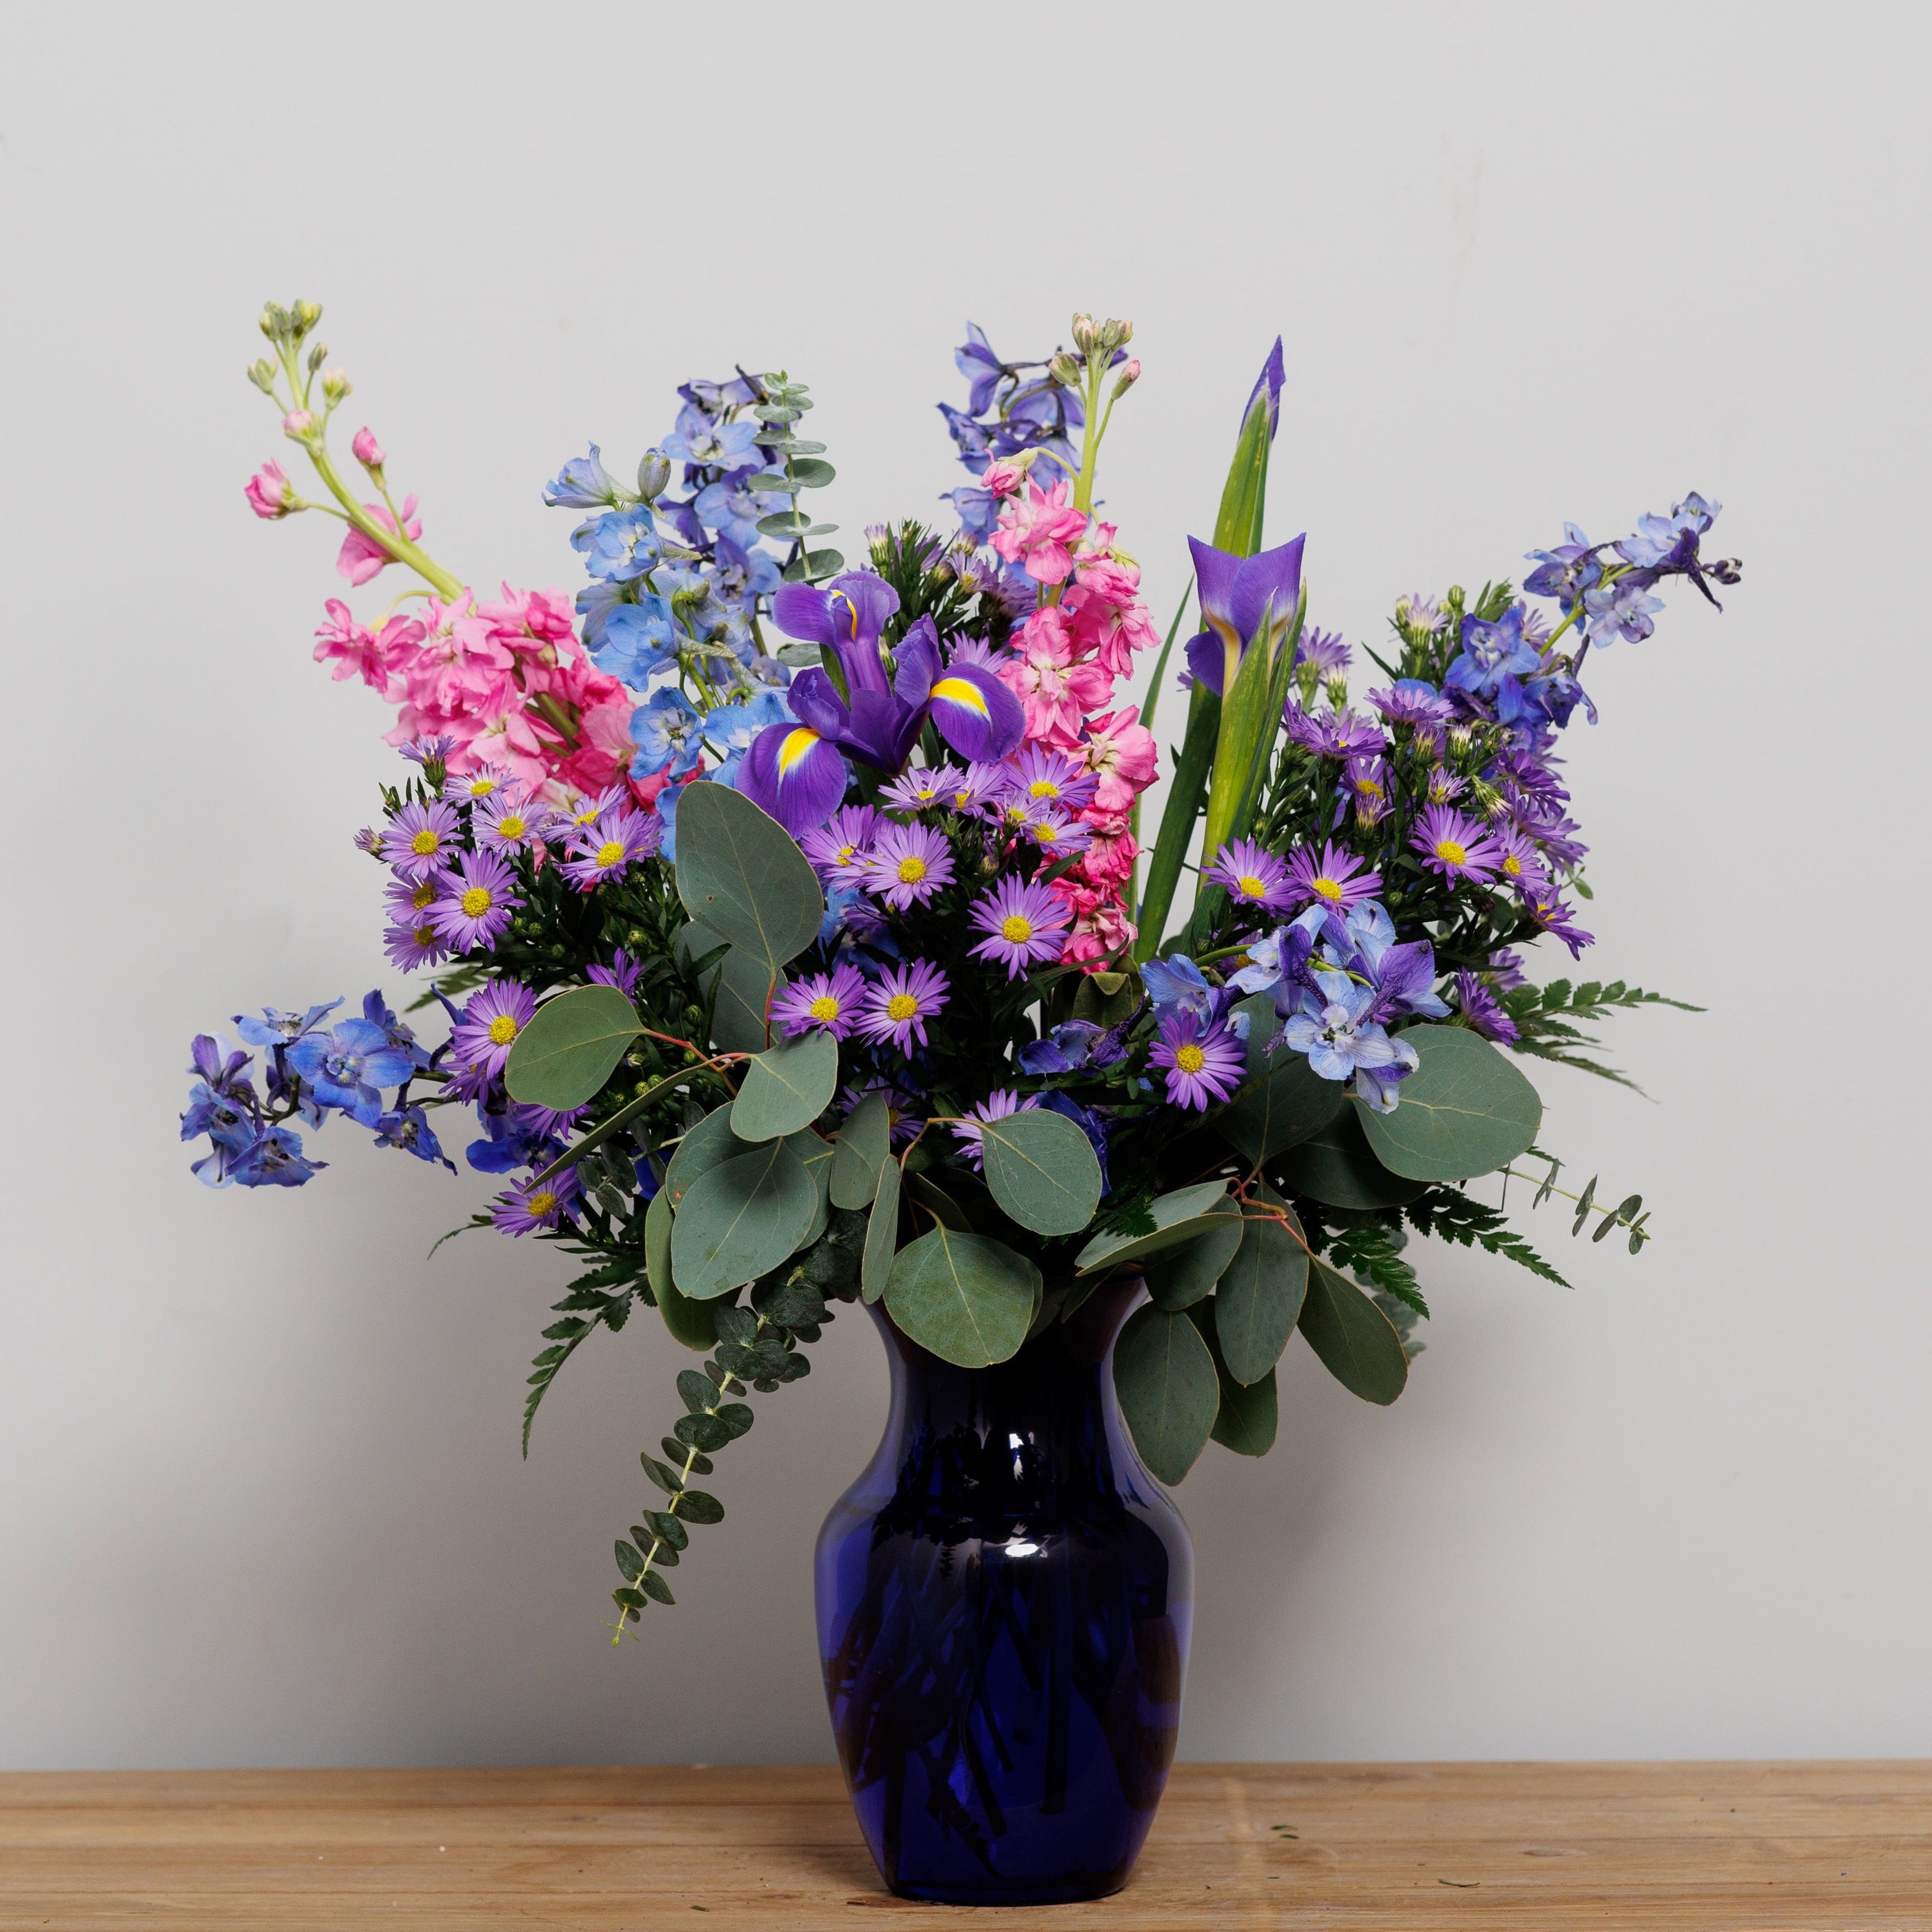 An all purple and blue arrangement in a blue vase.